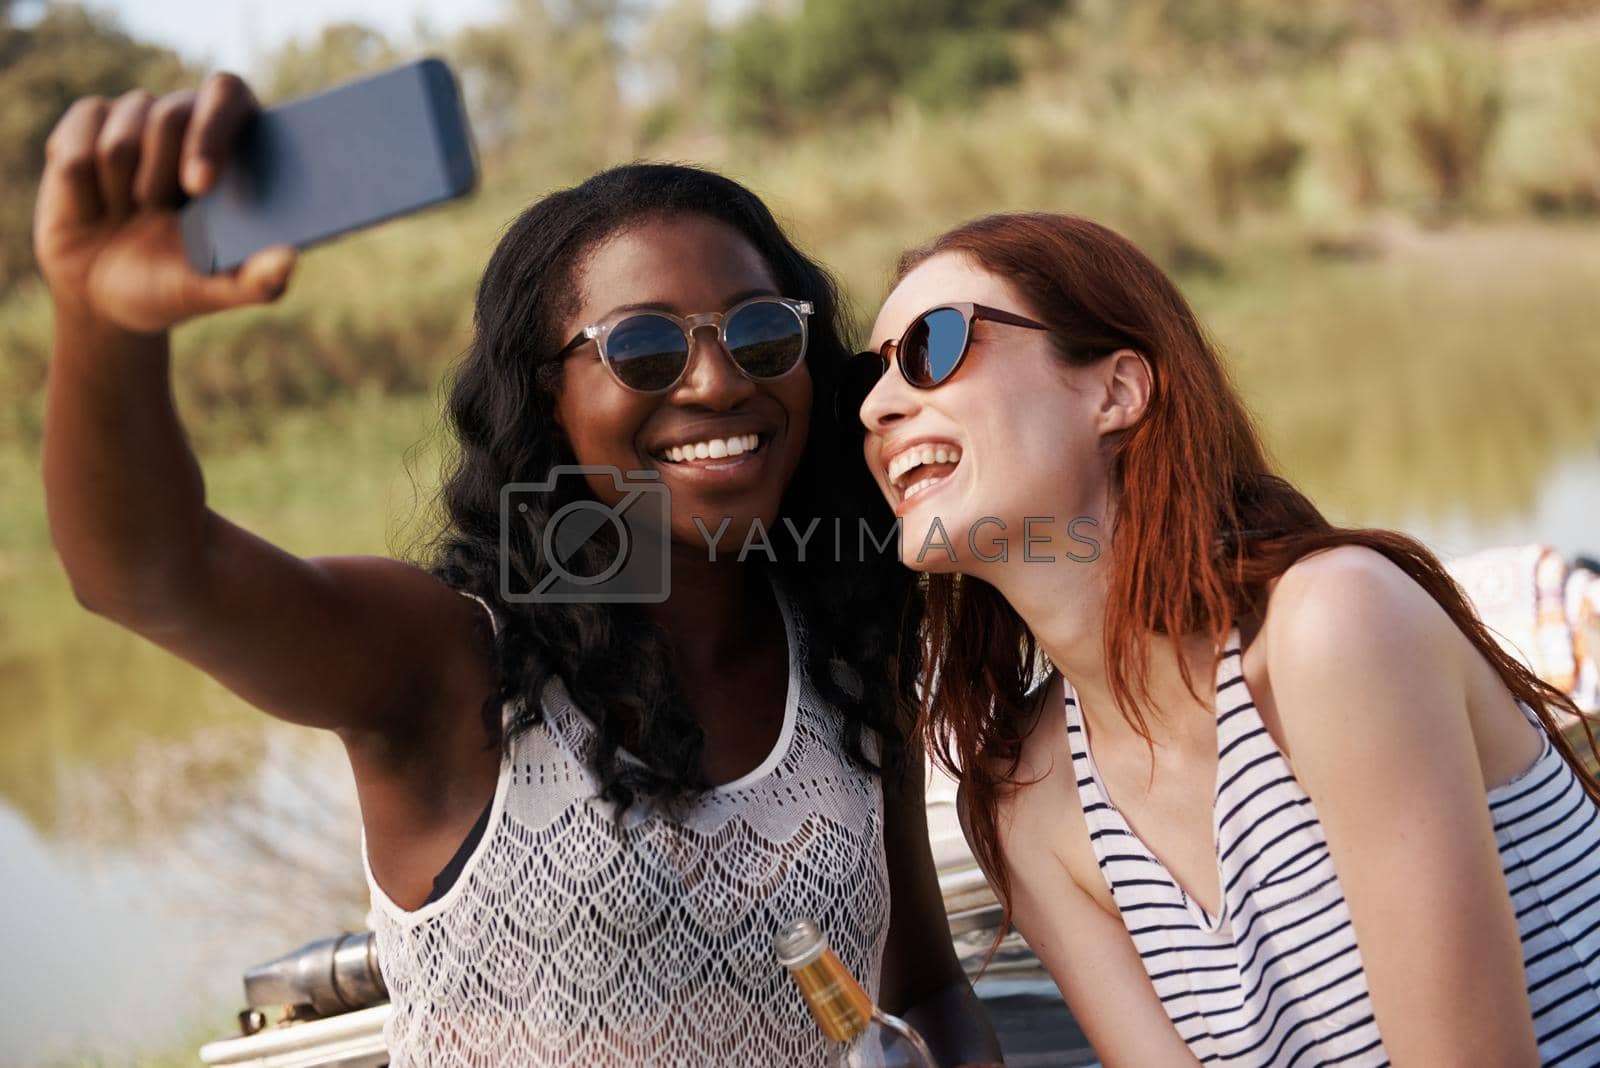 Royalty free image of Sharing a sunshine moment. two women snapping selfies on holiday. by YuriArcurs